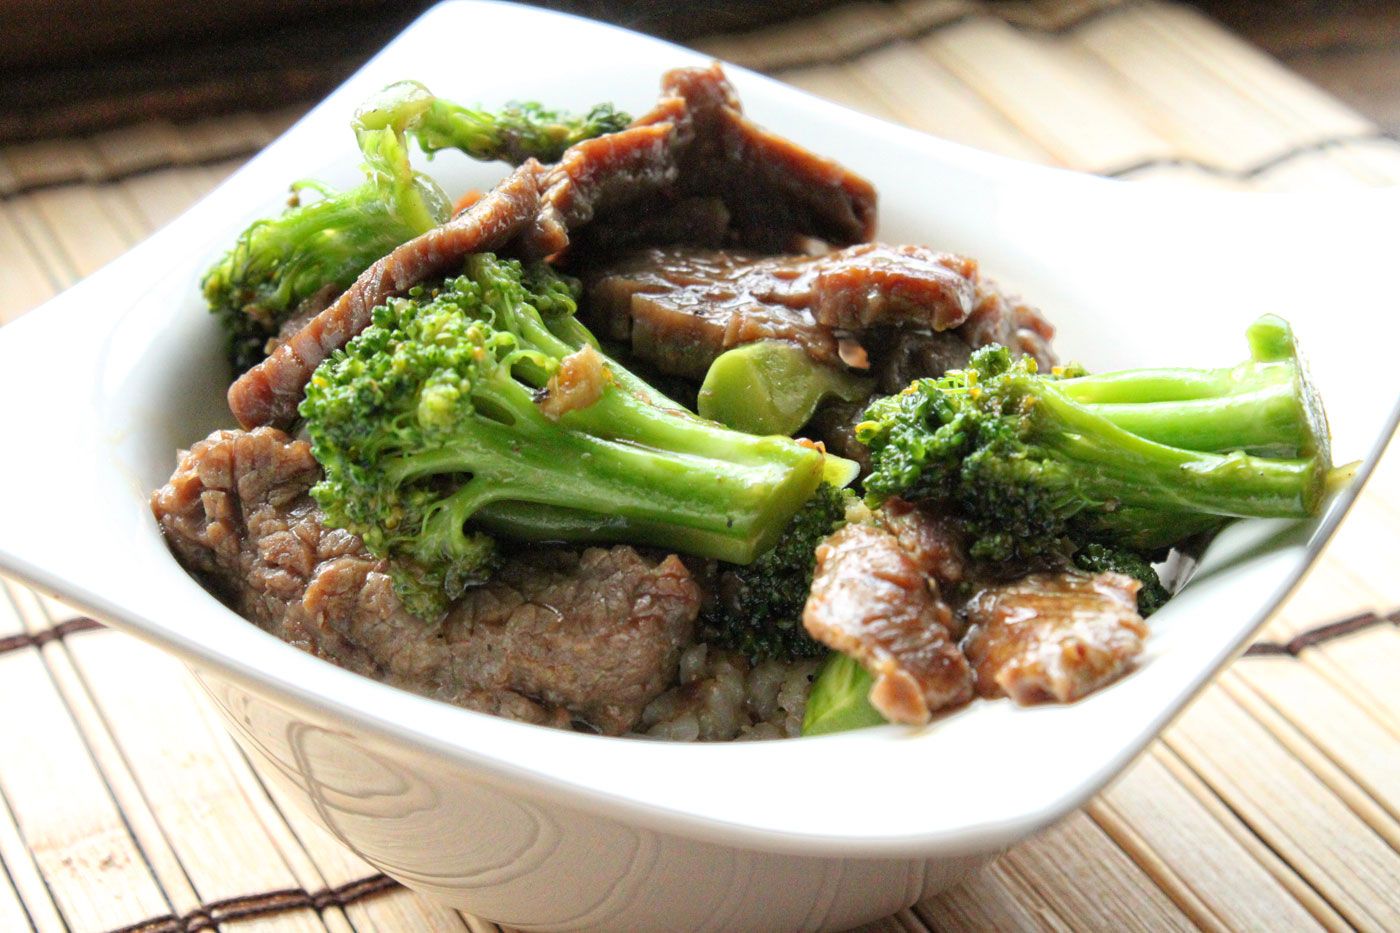 Beef and Broccoli Recipe: How to Make It and Tips for the Perfect Dish